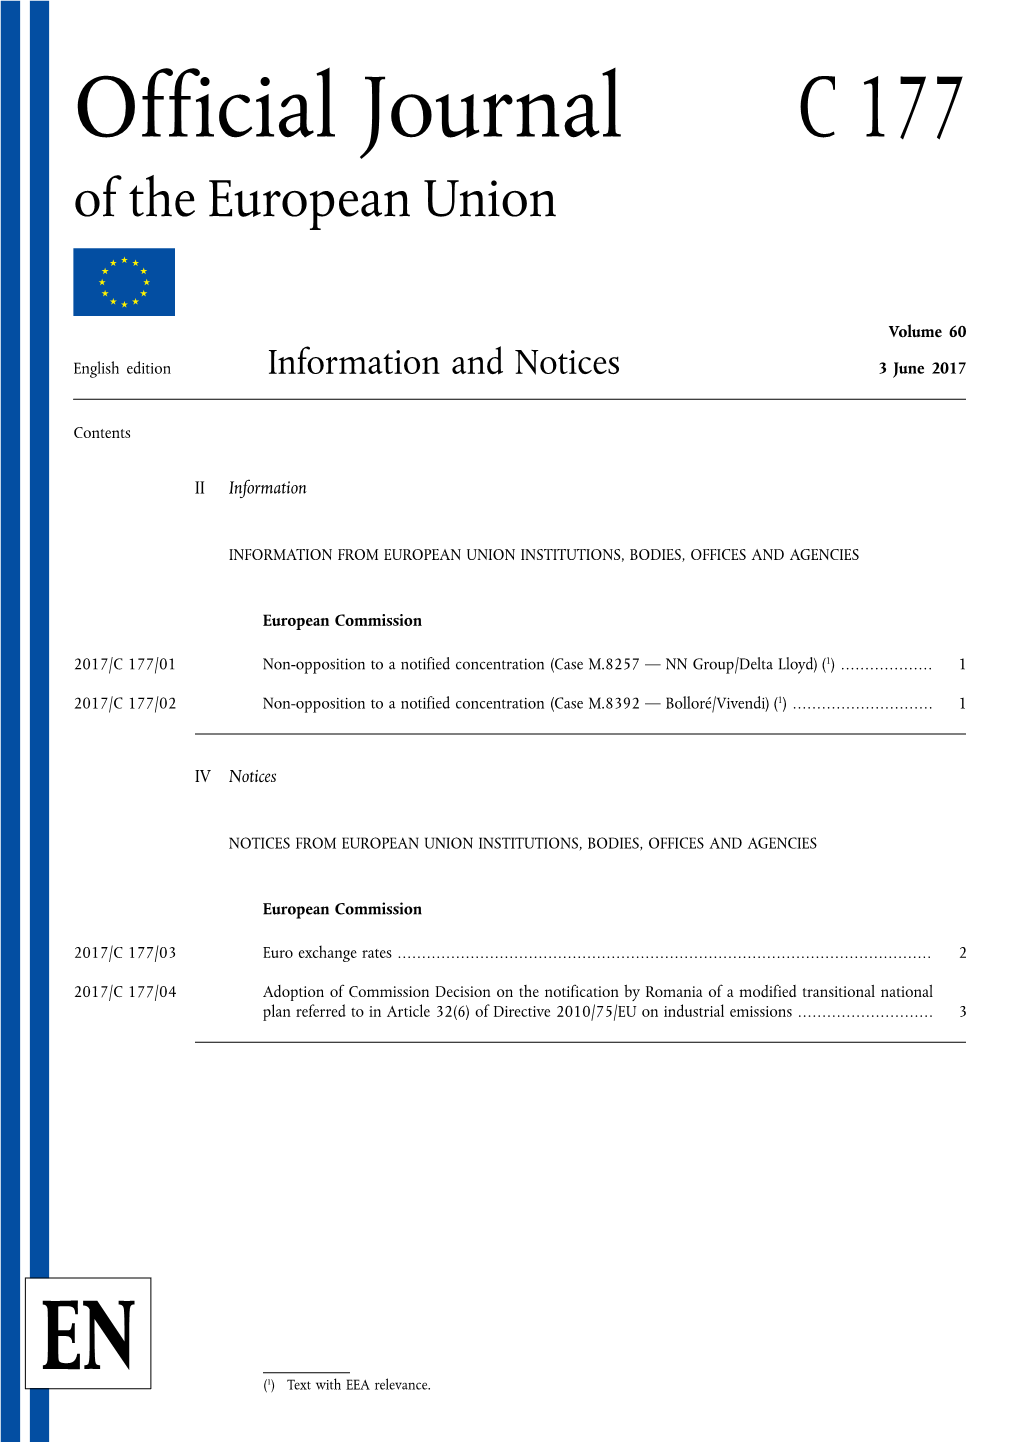 Official Journal C 177 of the European Union